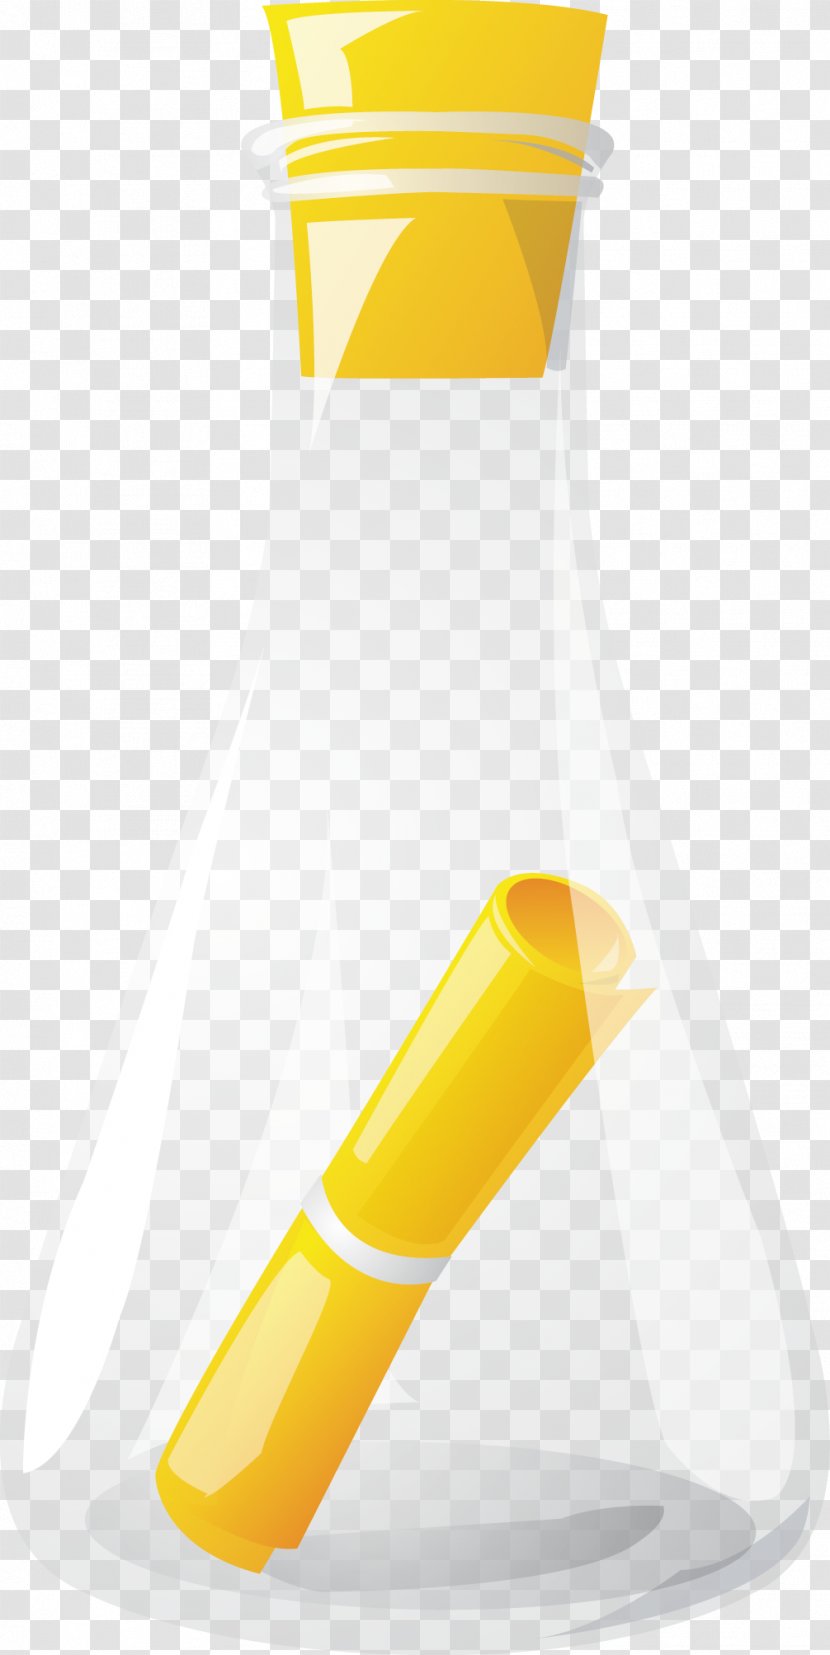 Download Euclidean Vector - Yellow - Wishing Bottle Material Transparent PNG